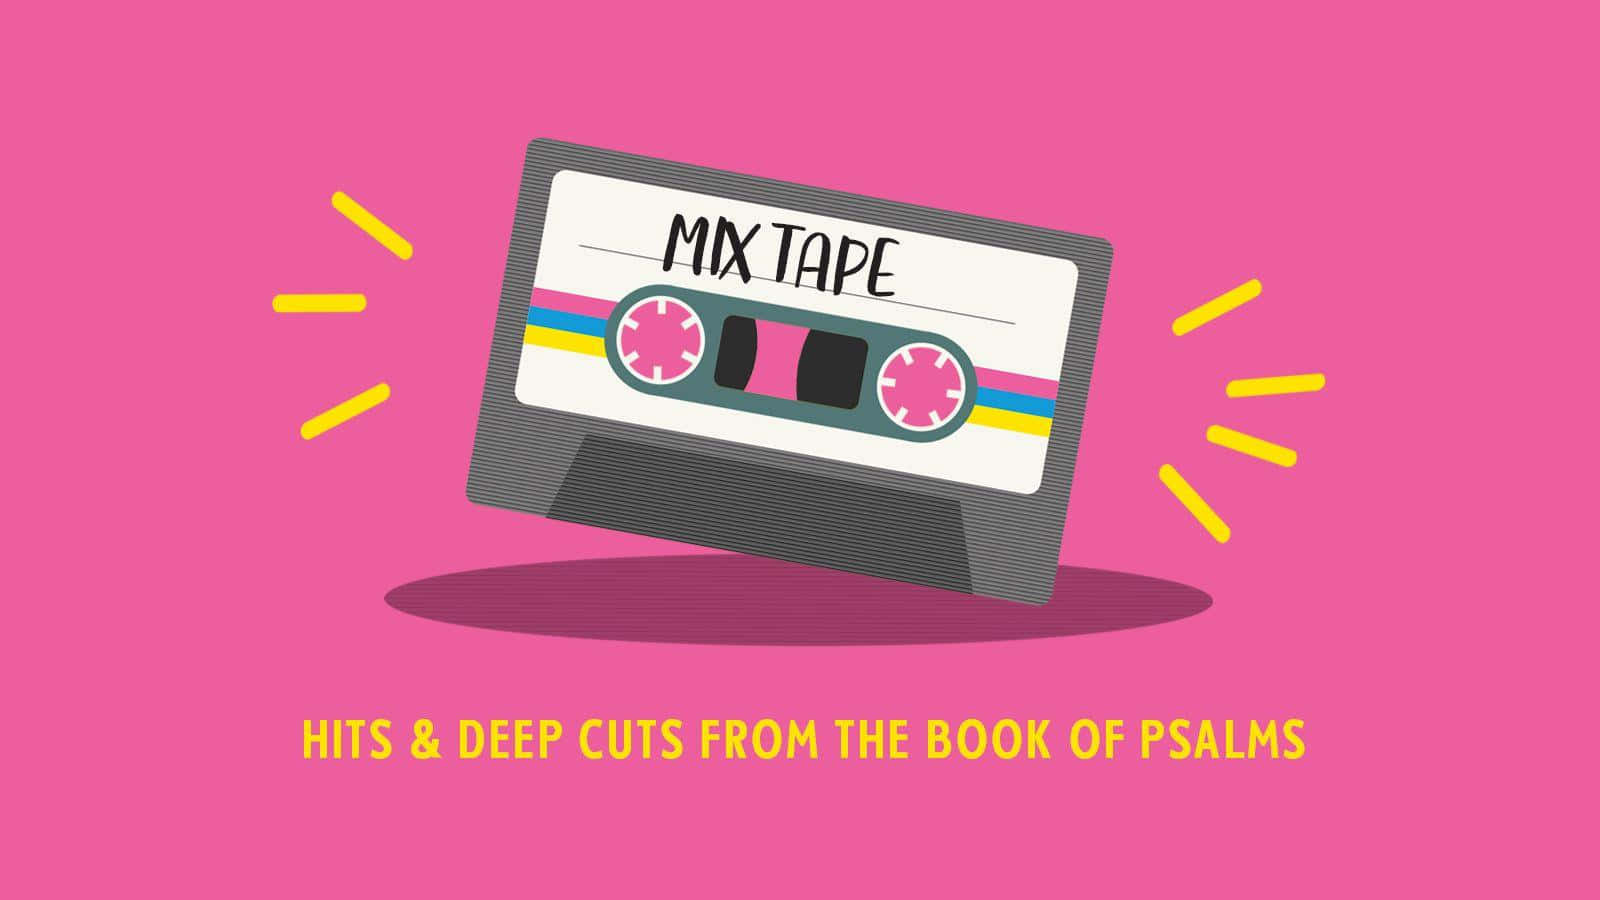 Add a touch of vintage swag to your home with this modern mixtape wallpaper!